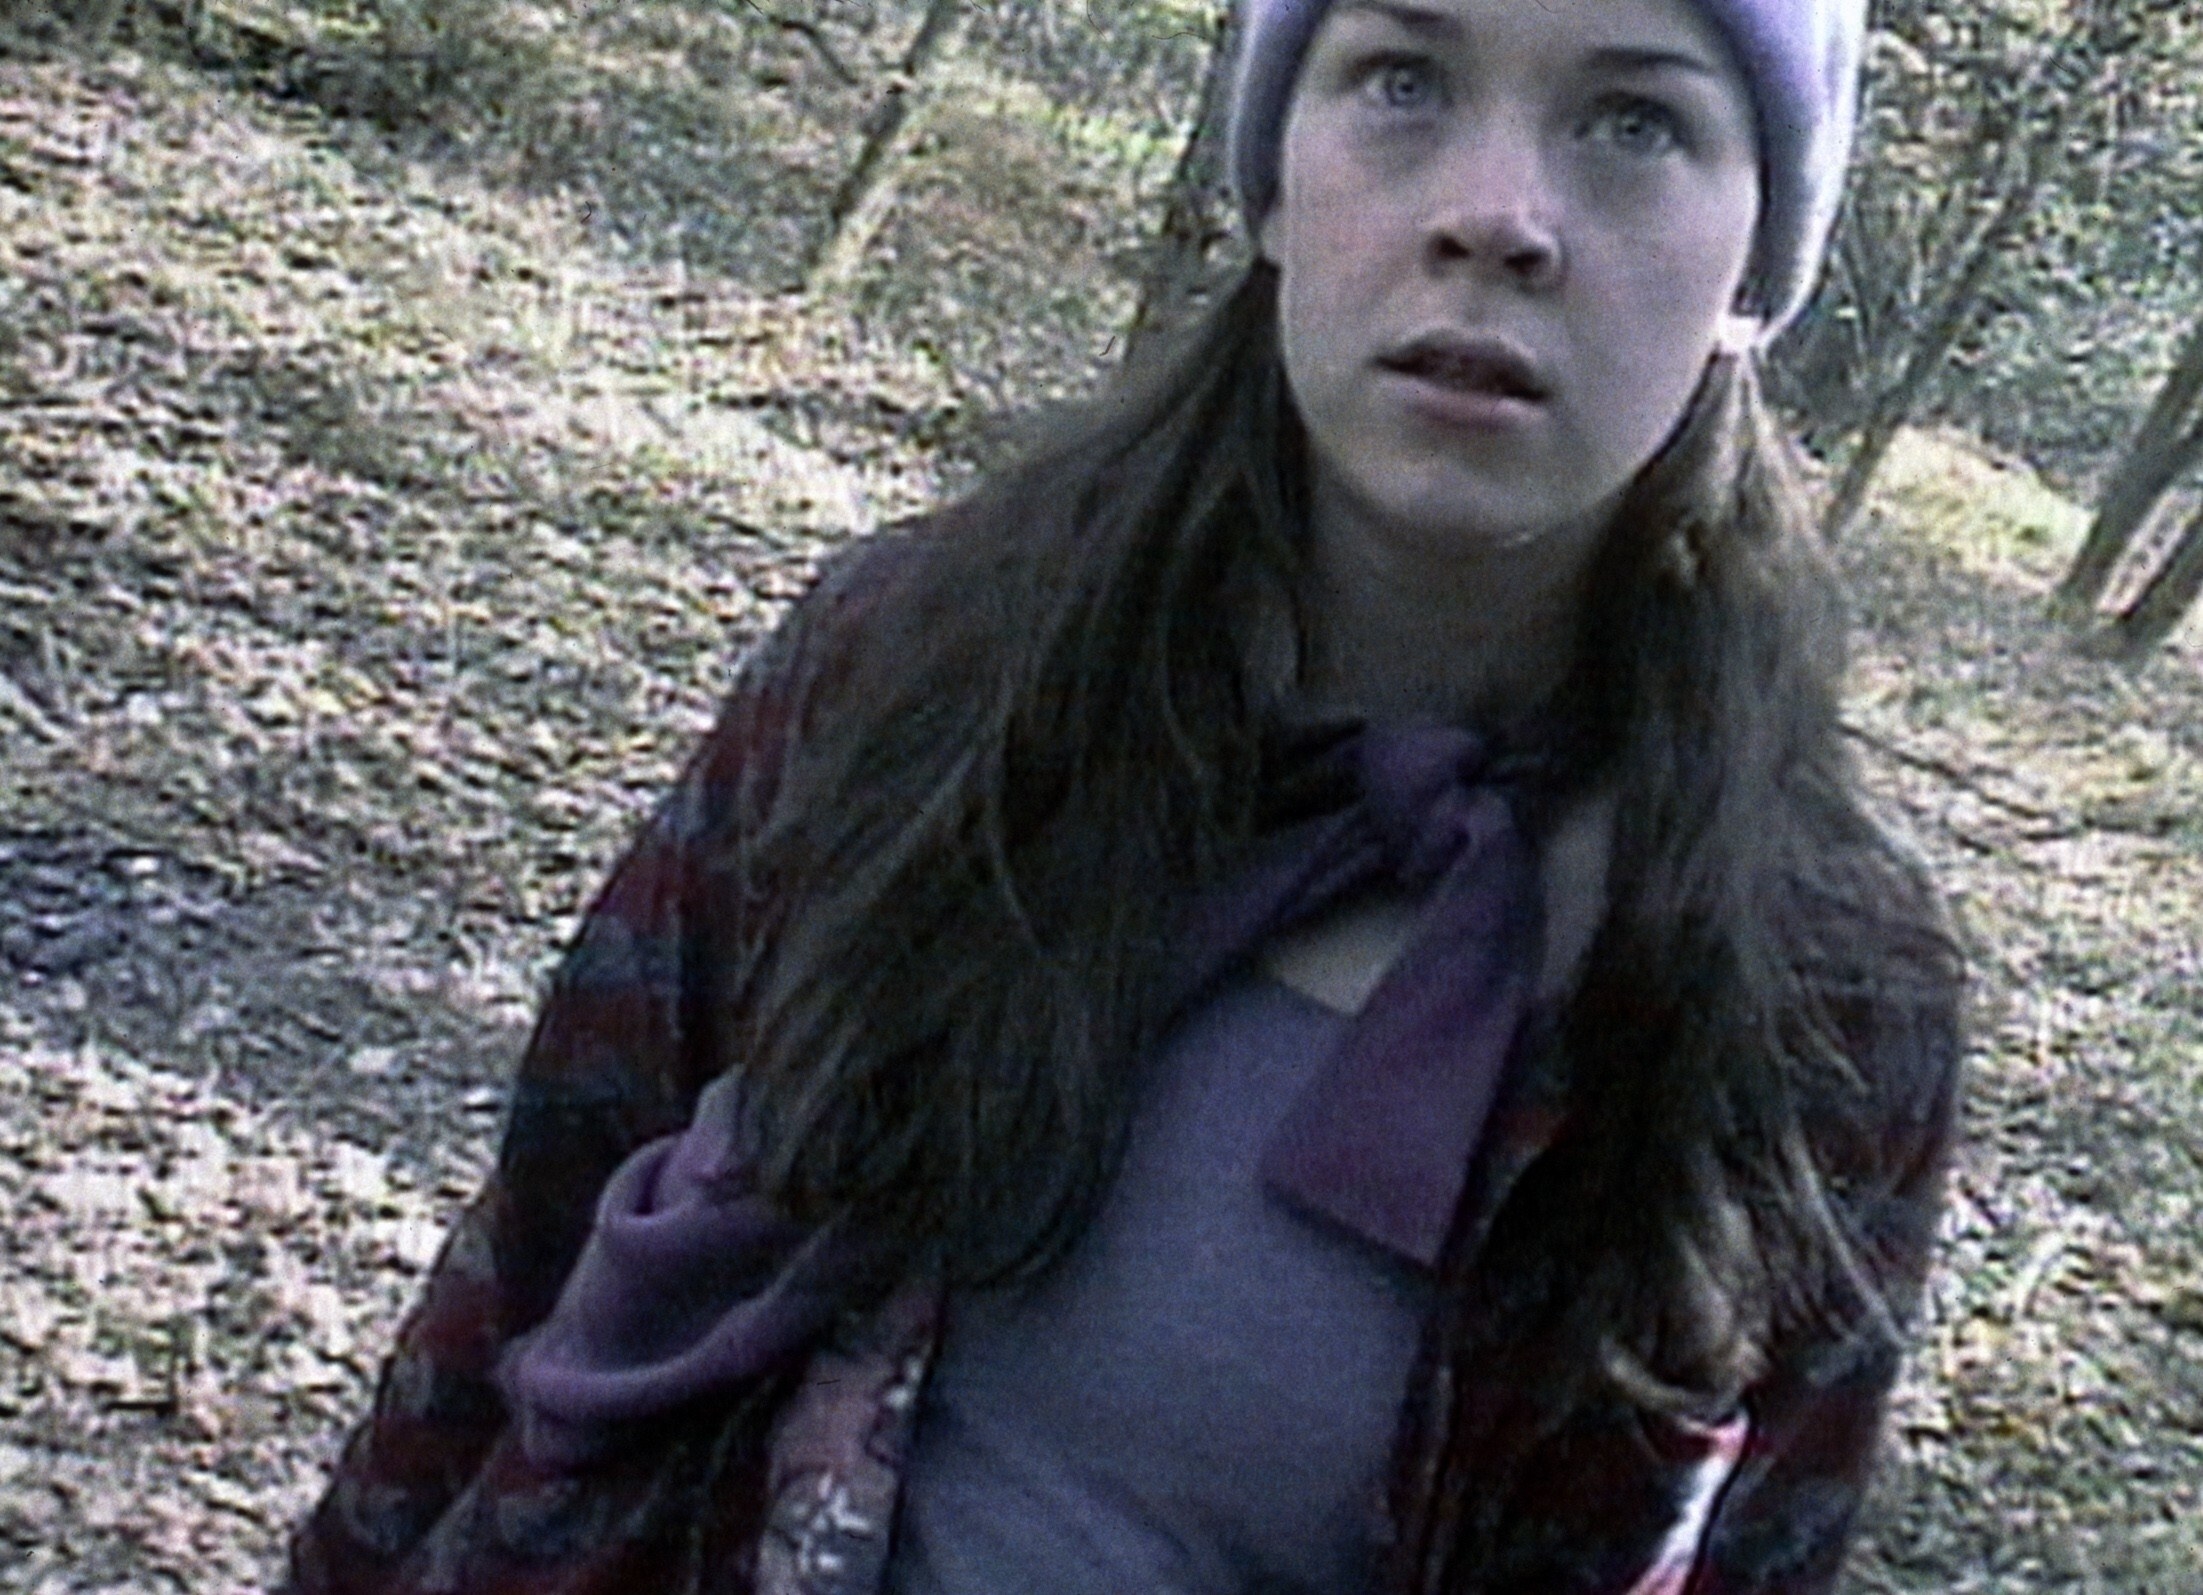 Heather Donahue staring at someone behind the camera in the blair witch project